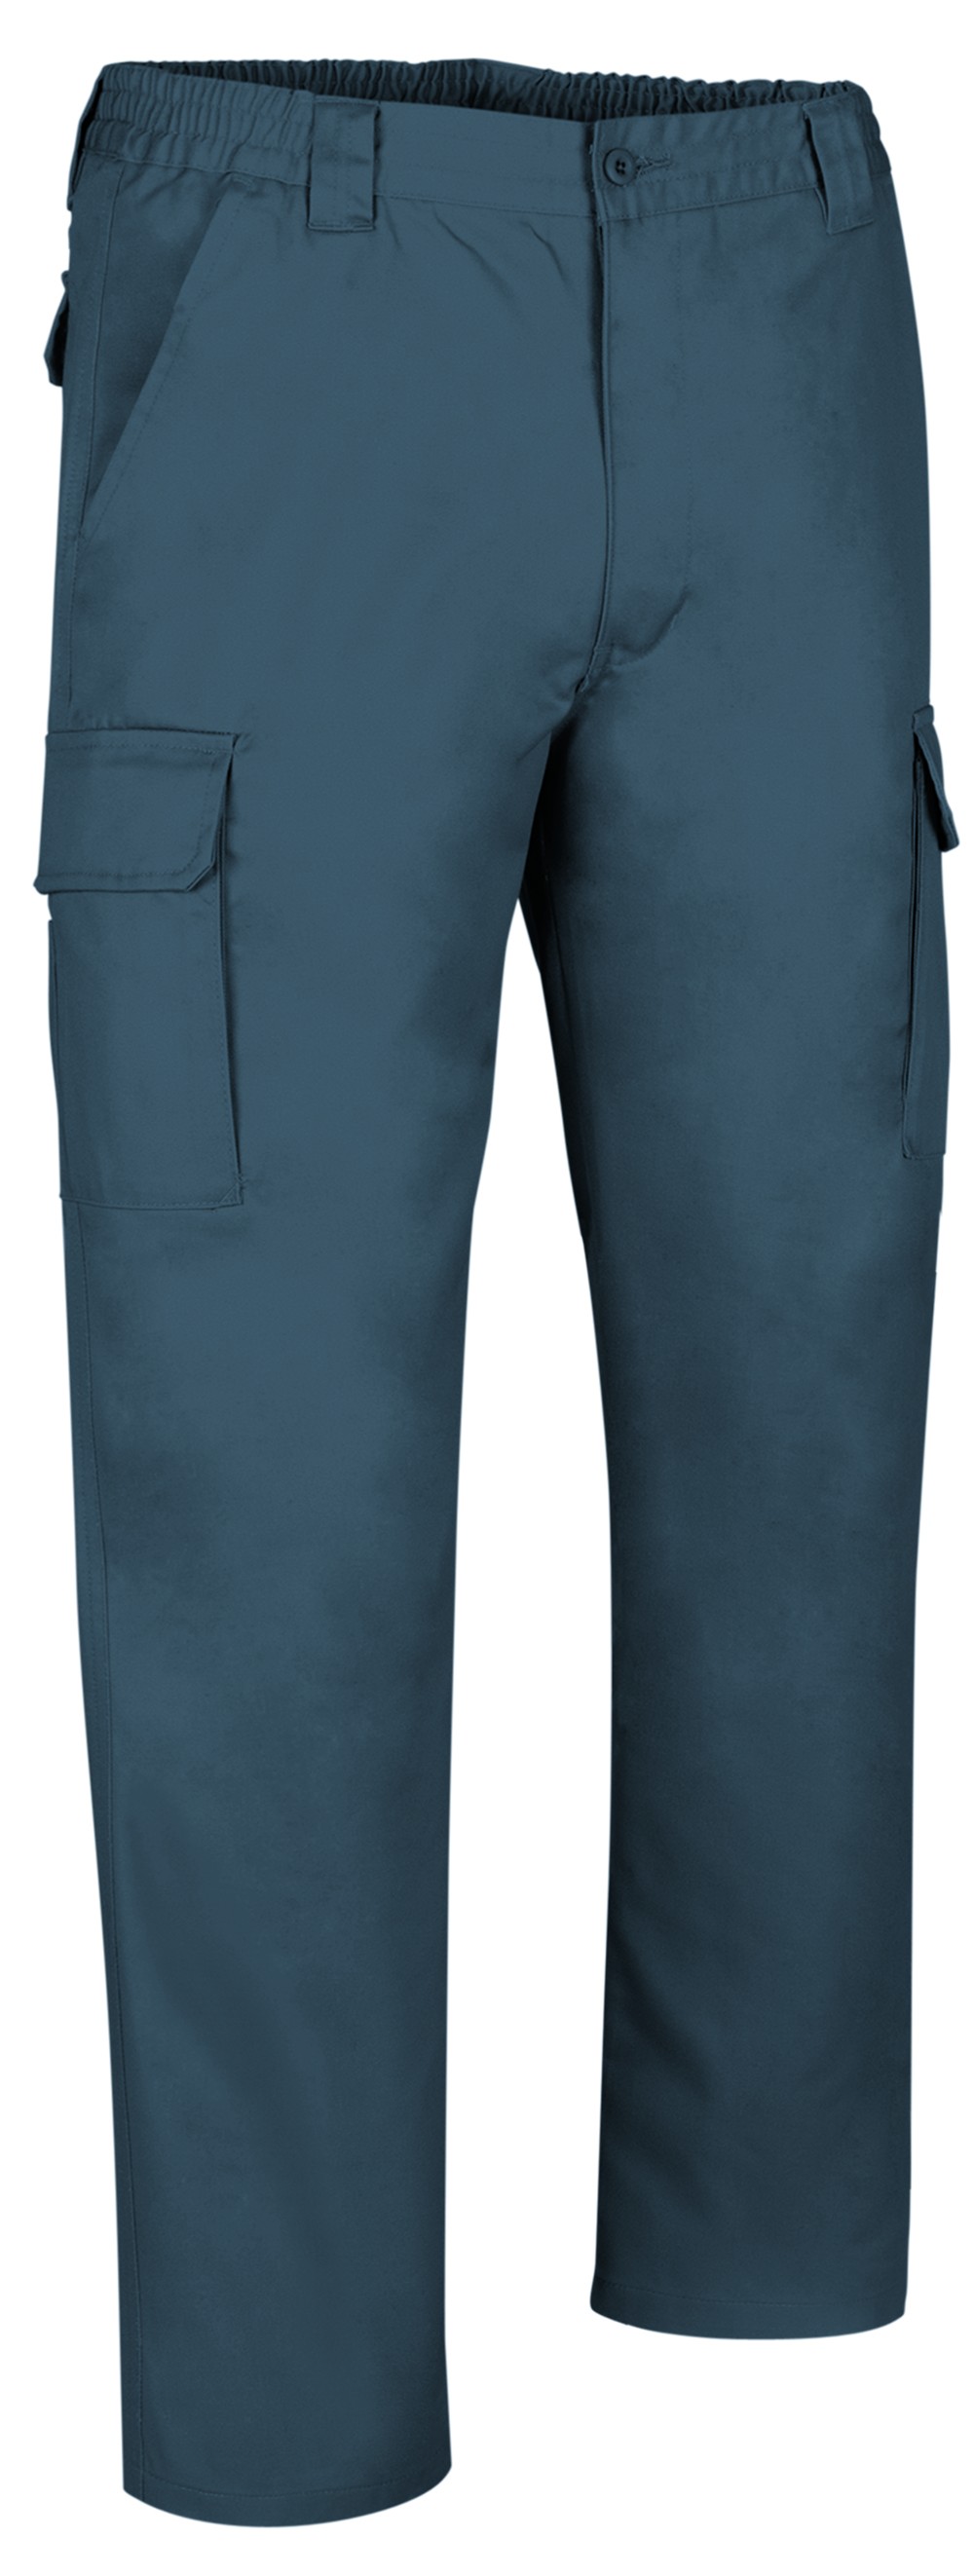 Pantalon travail multipoches eco Roble Valento Chaussures-pro.fr